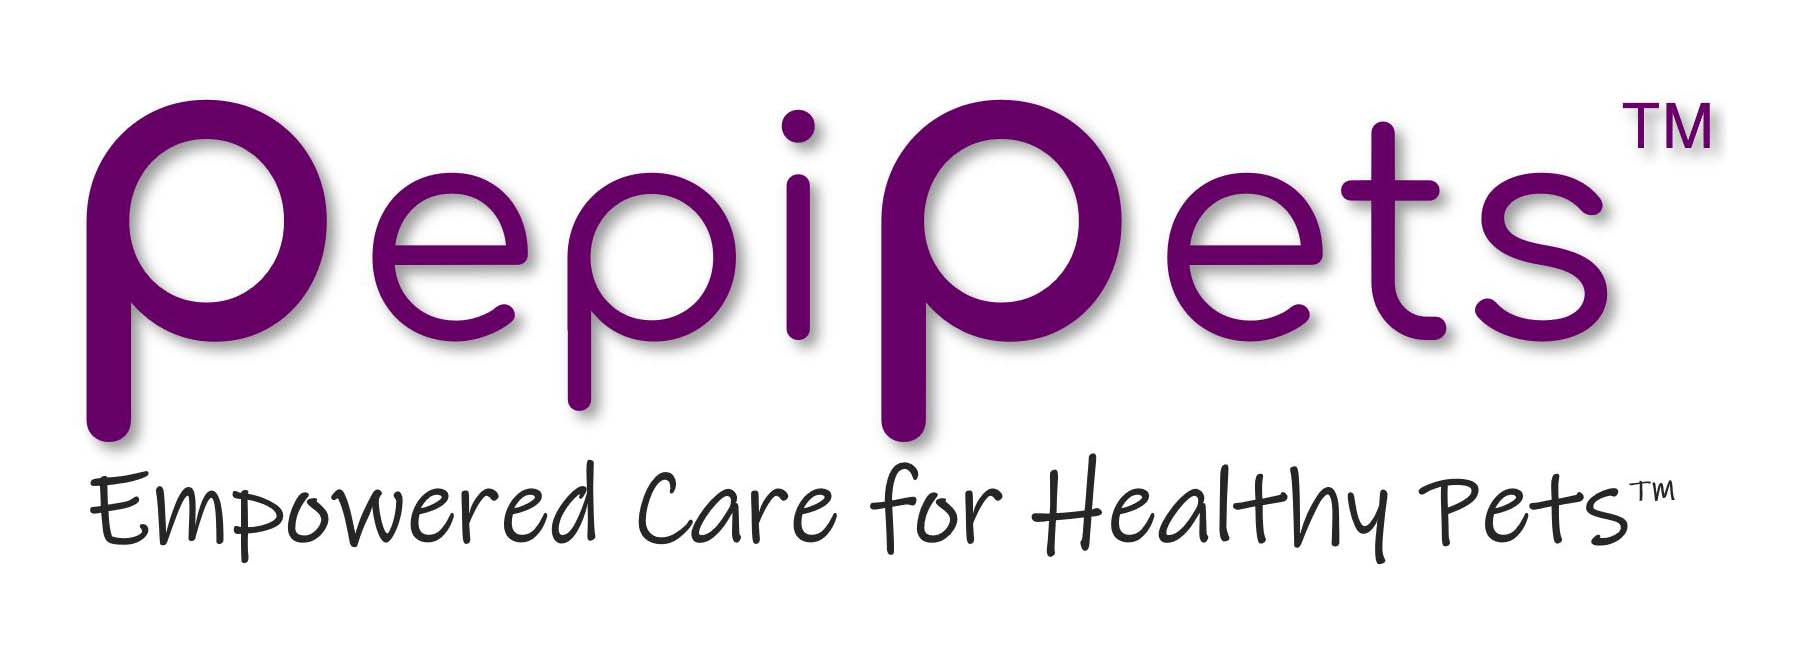 PepiPets Announces New Mobile Diagnostic Testing Services for Dogs and Cats